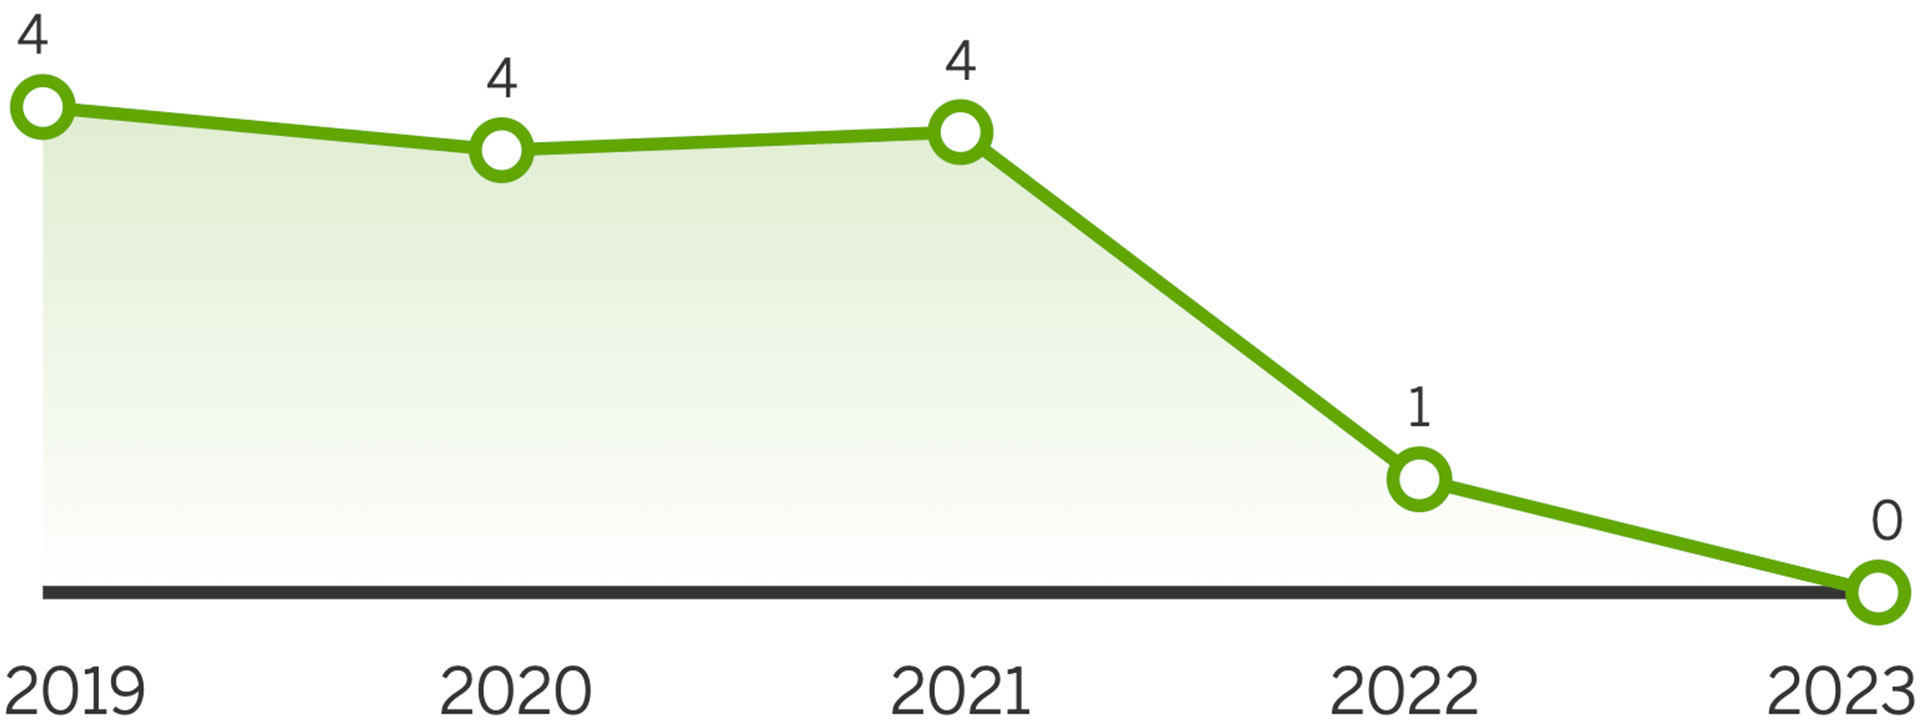 Graph showing values of 4-0 during 2019-2023